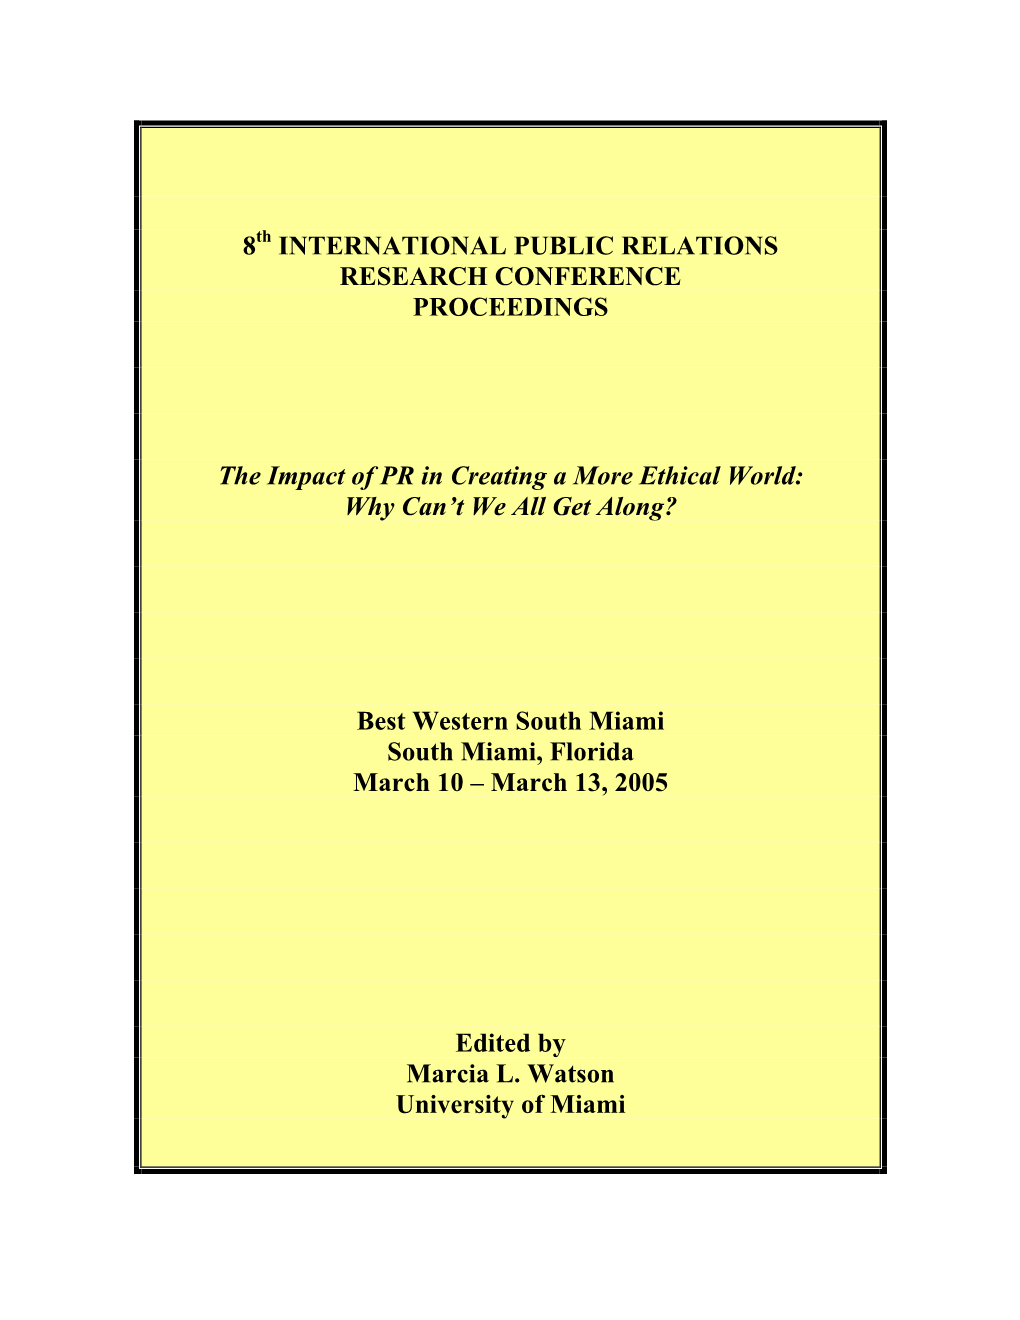 8Th INTERNATIONAL PUBLIC RELATIONS RESEARCH CONFERENCE PROCEEDINGS